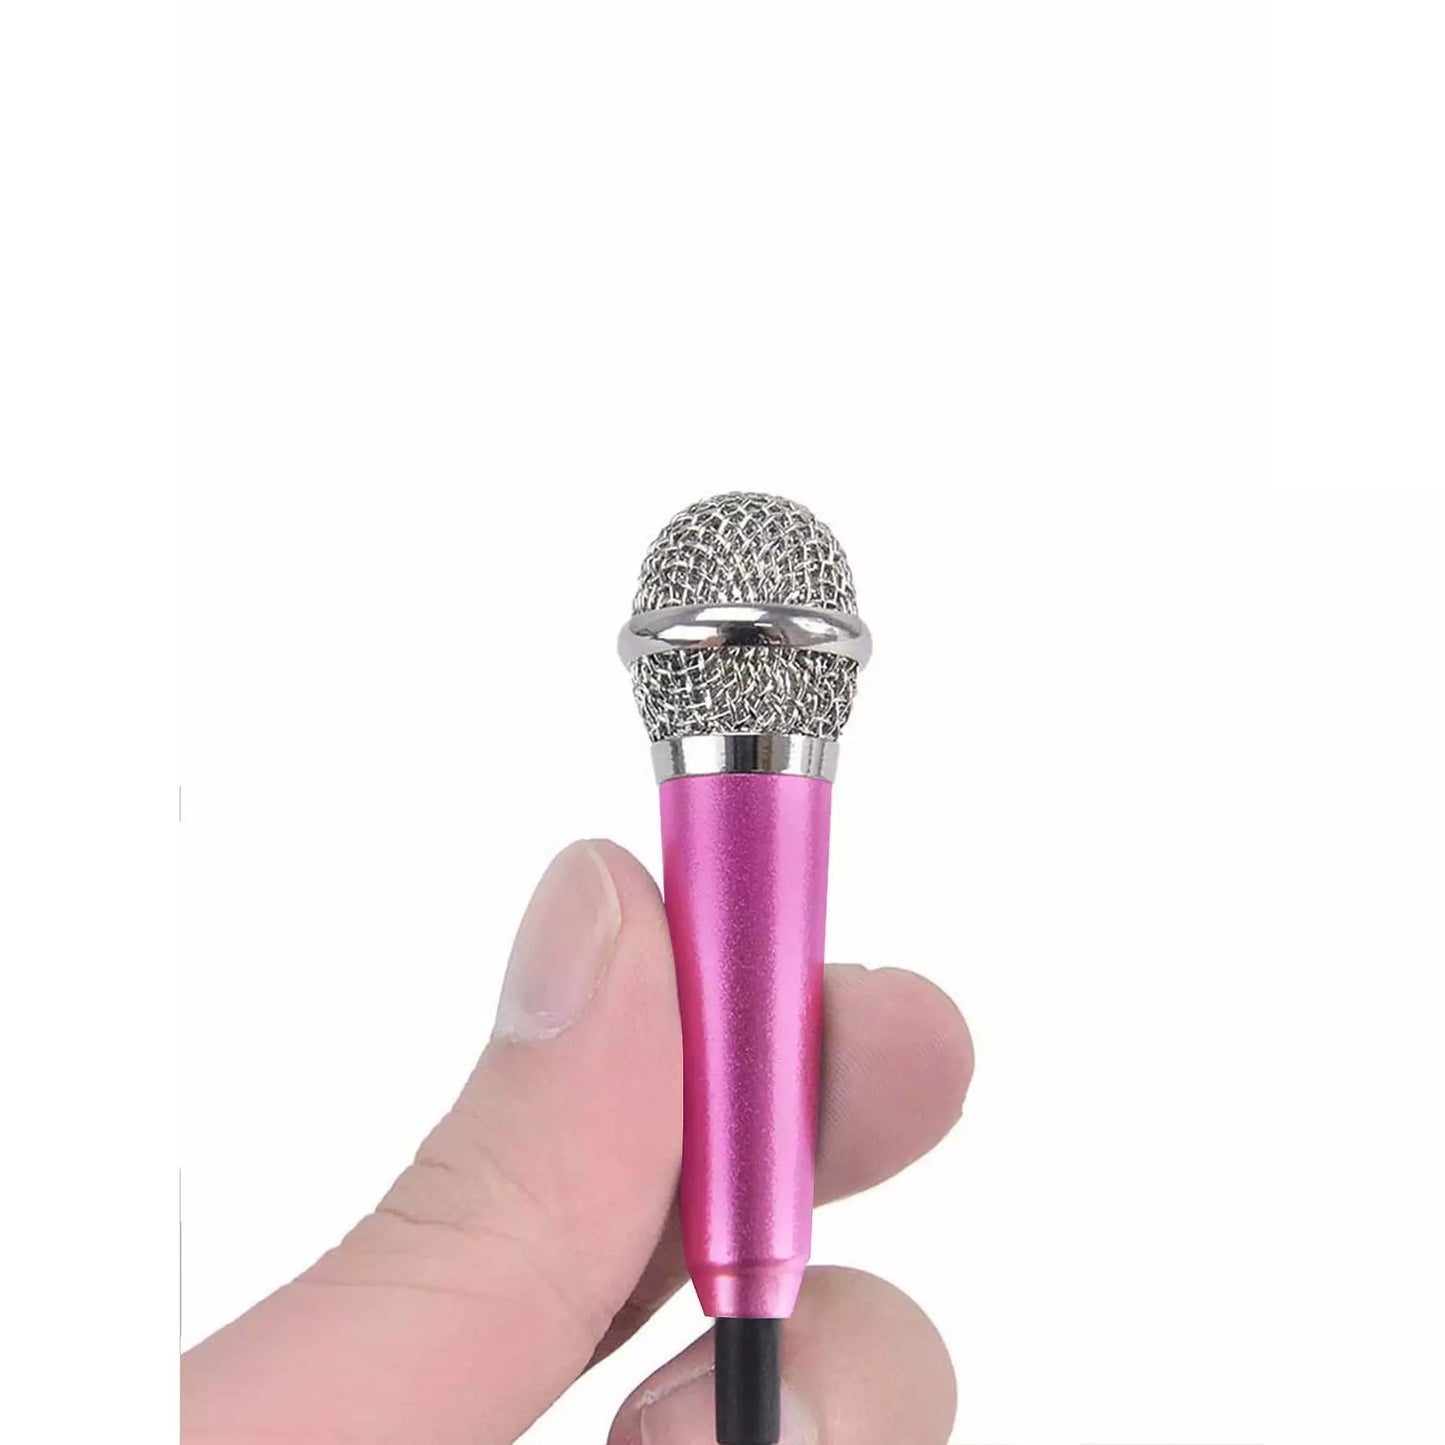 small mic, BIG TALK! #tinythings Portable Mini Microphone for iPhone/Android